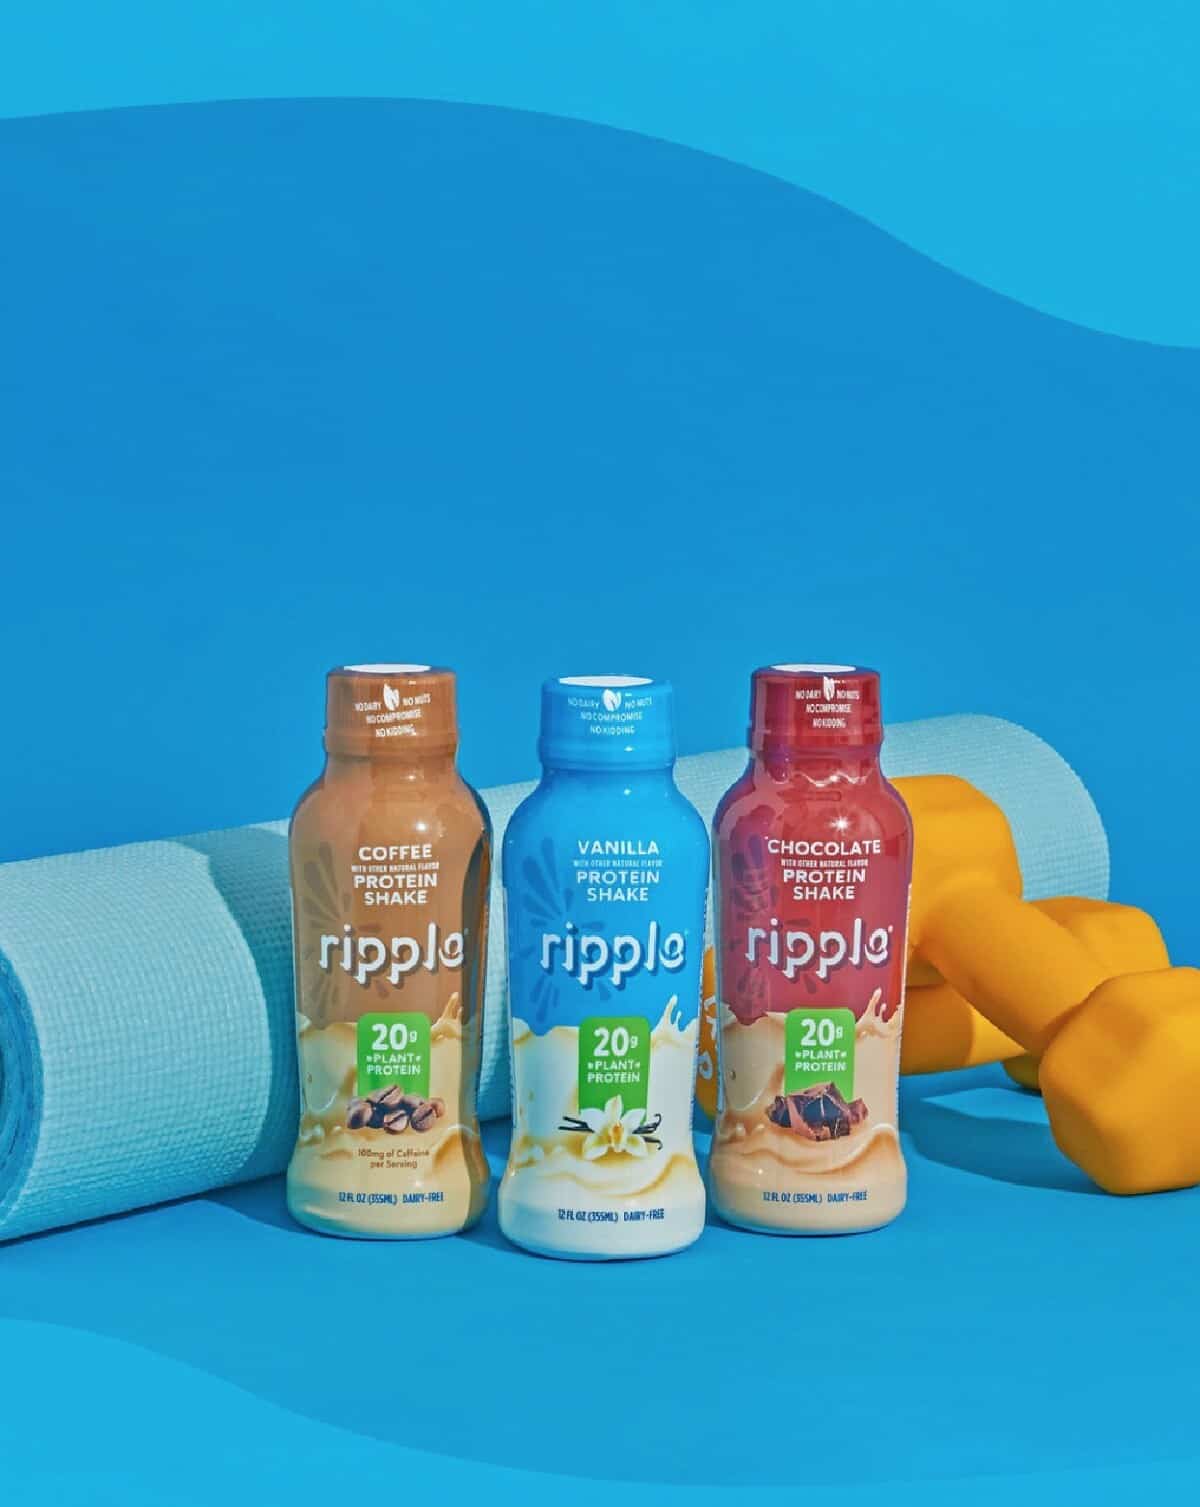 Three Ripple plant-based protein shakes in coffee, vanilla and chocolate standing against a yoga mat and set of weights on a blue background.